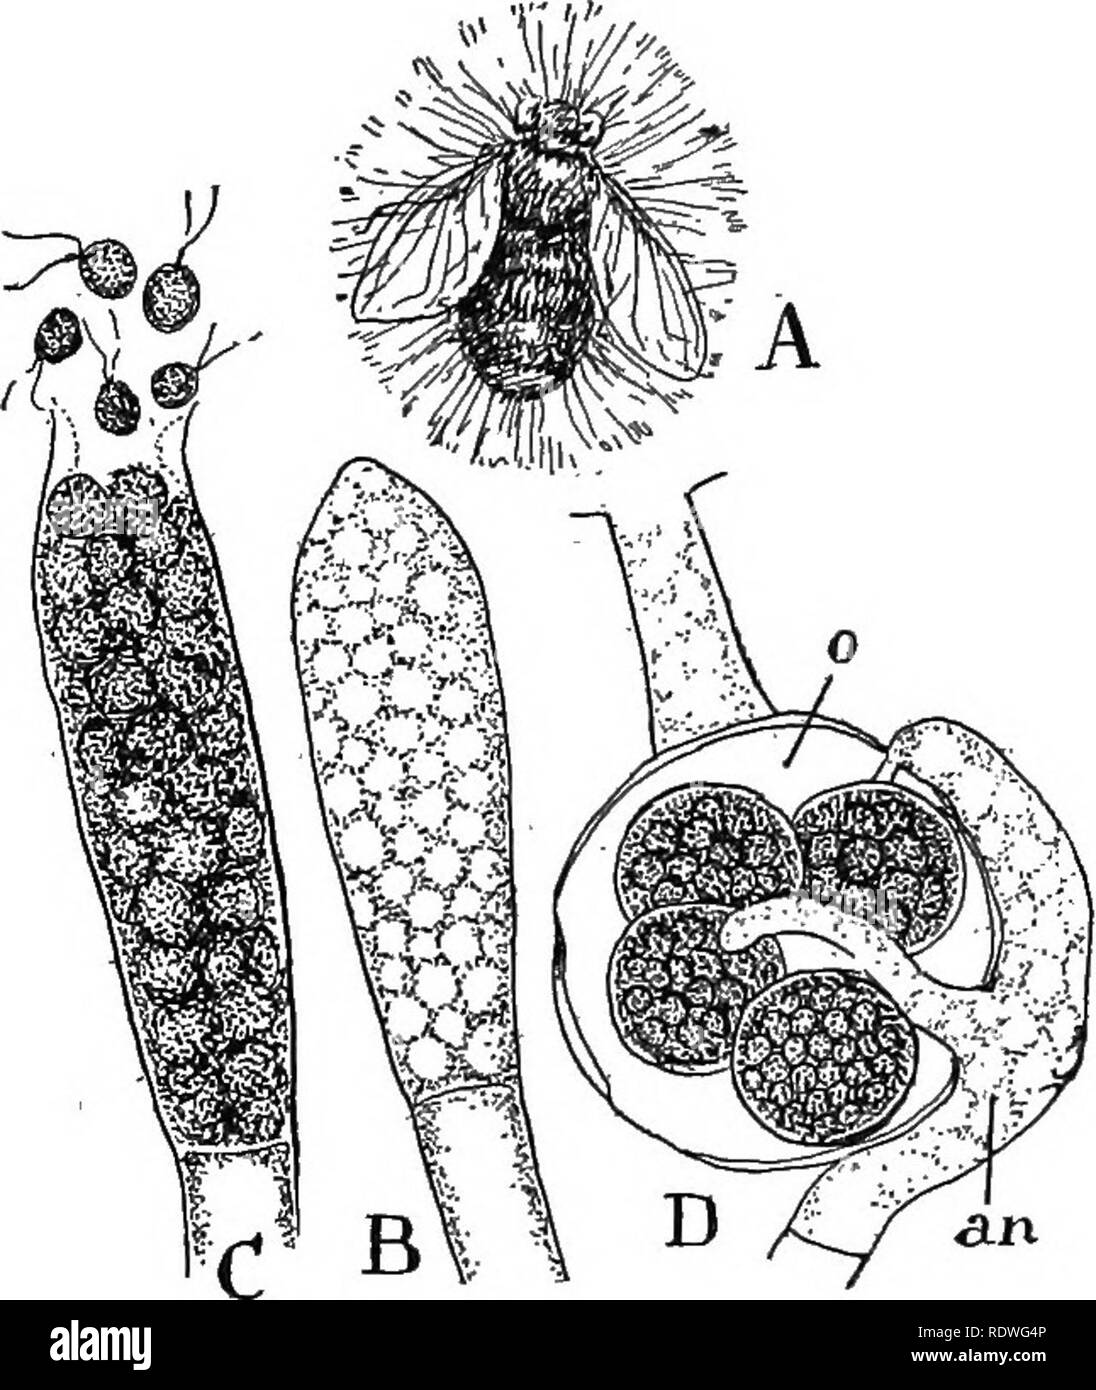 . Nature and development of plants. Botany. IJEVELOPMENT OF PLANTS 219 ing tubular threads without partitions but containing numerous nuclei and thus resembling Vaucheria save for the absence of chloroplasts (Fig. 130). The sporangia are also formed by the cutting off of the tip of one of the branches by a transverse wall. The contents of a sporangium, however, generally breaks up into a very large number of biciliate zoospores (Fig. 130, C). In the species that cause so much damage to fish, the spores come to rest upon the fish and form tubular outgrowths that readily penetrate the tissues of Stock Photo